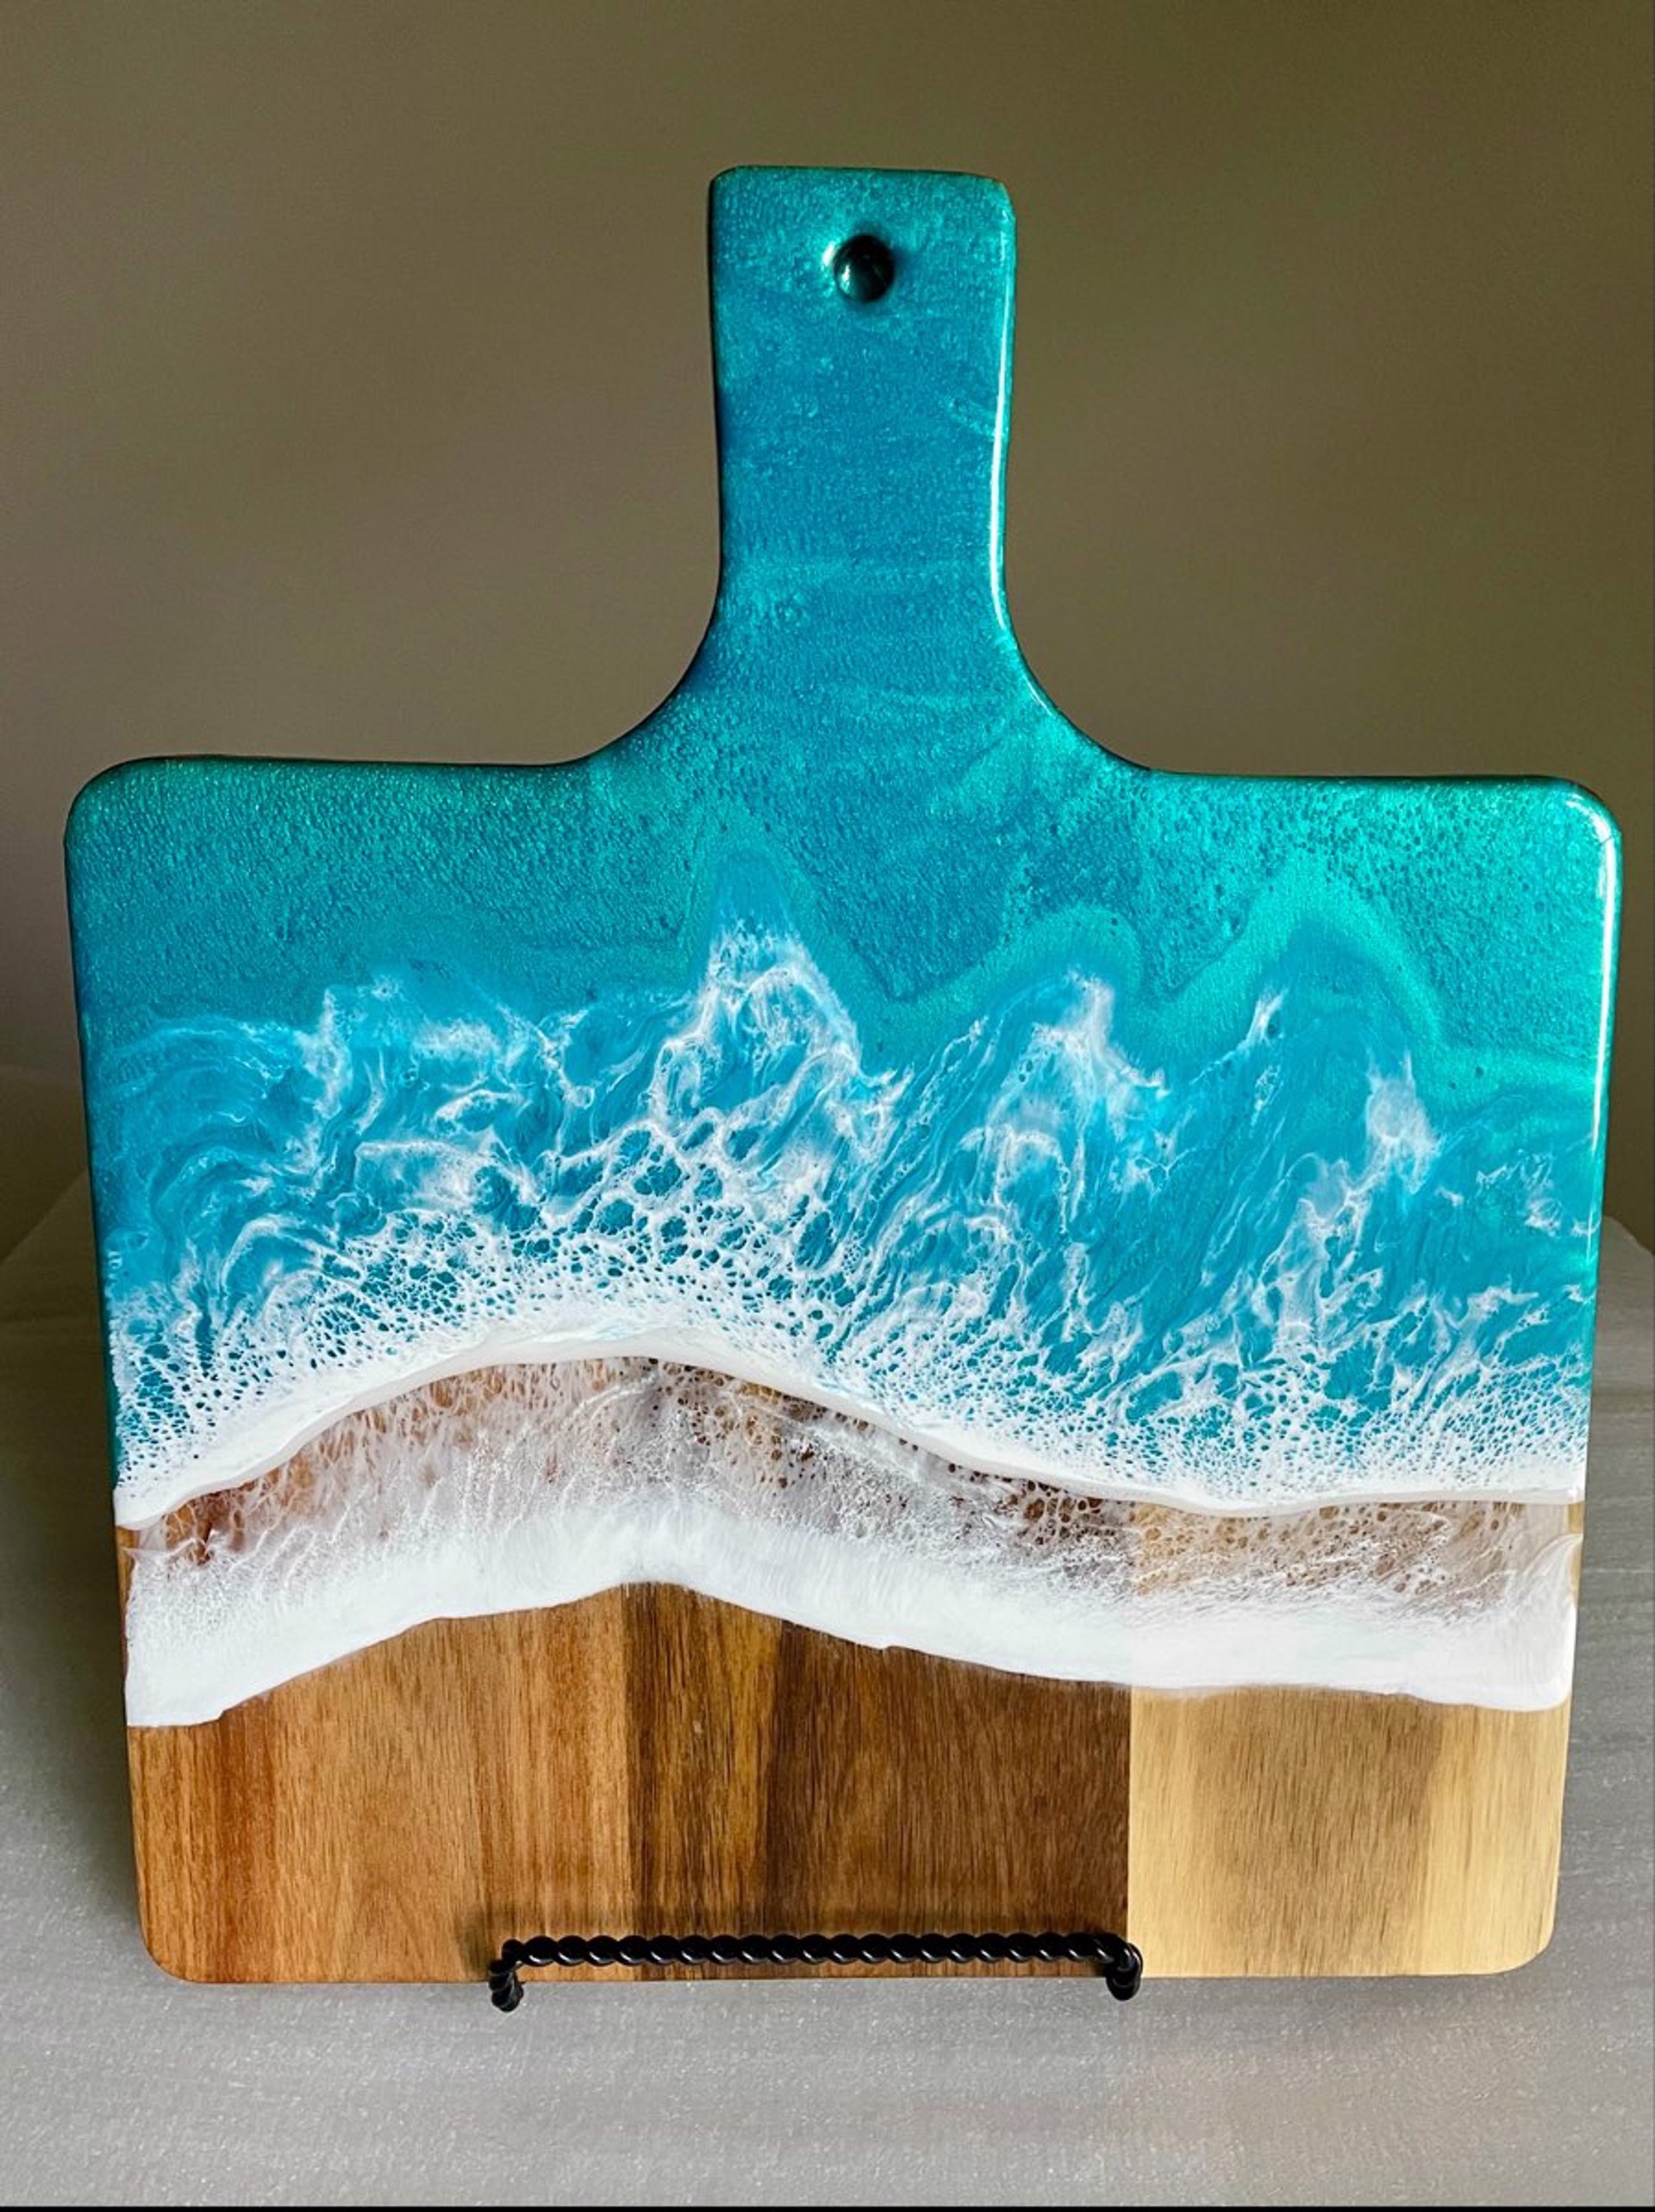 MDM22-28 Square Teal Resin and Wood Charcuterie Board by Mary Duke McCartt